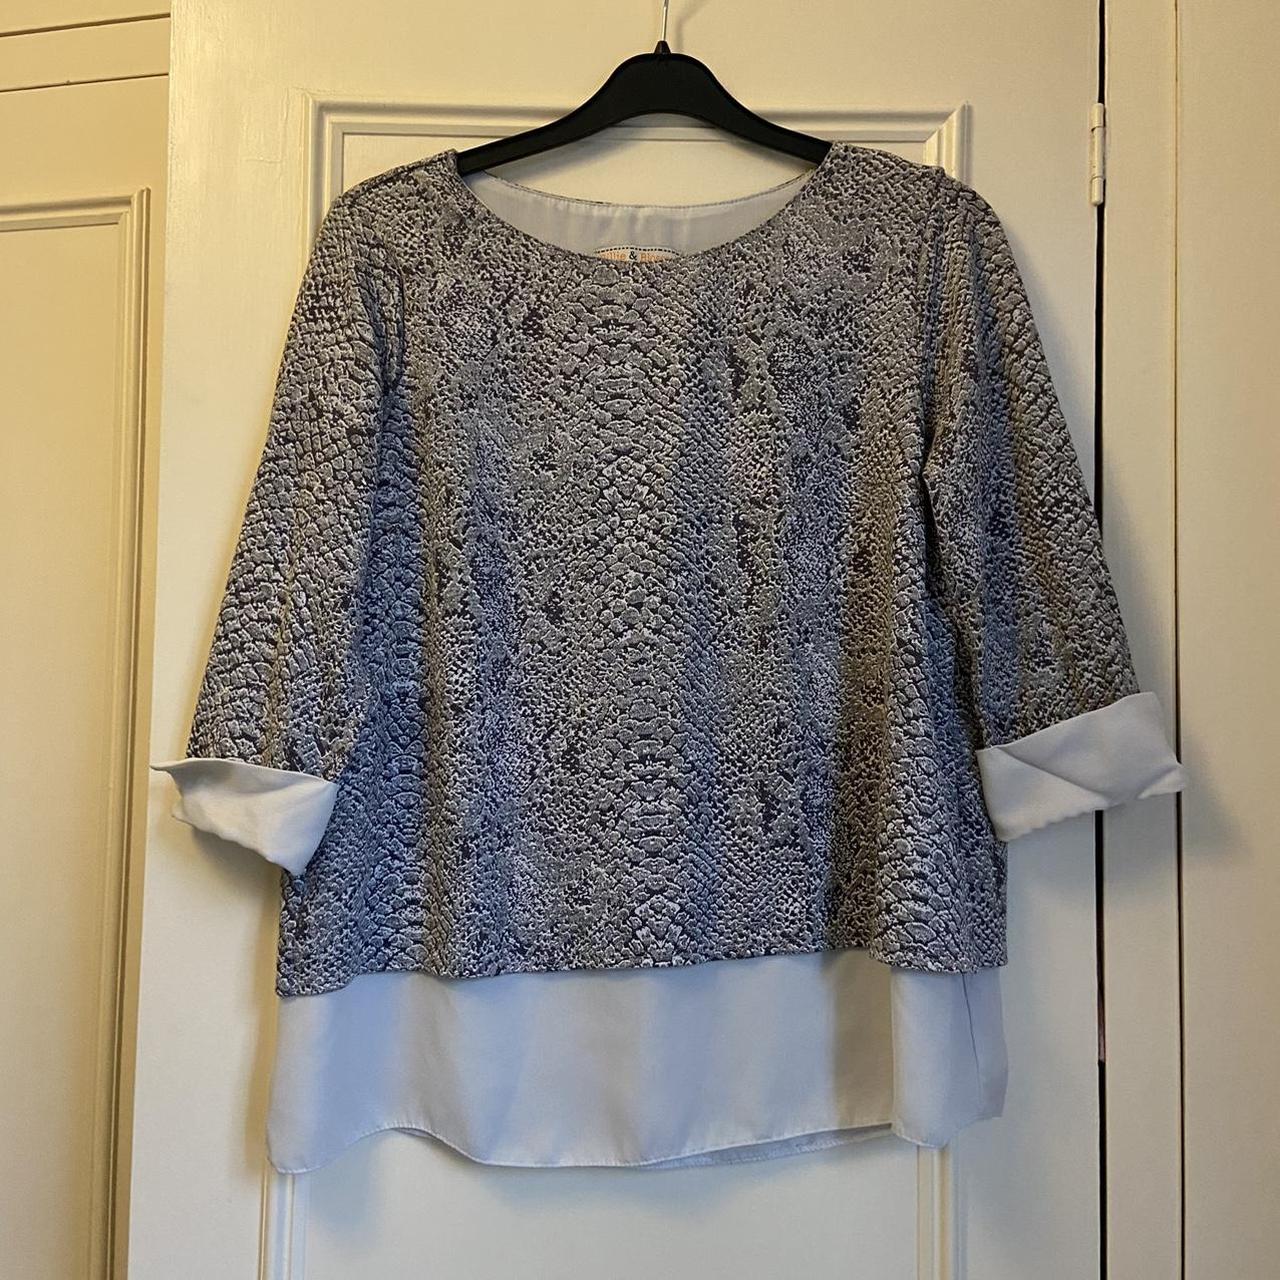 Dorothy Perkins Women's Grey and White Blouse | Depop